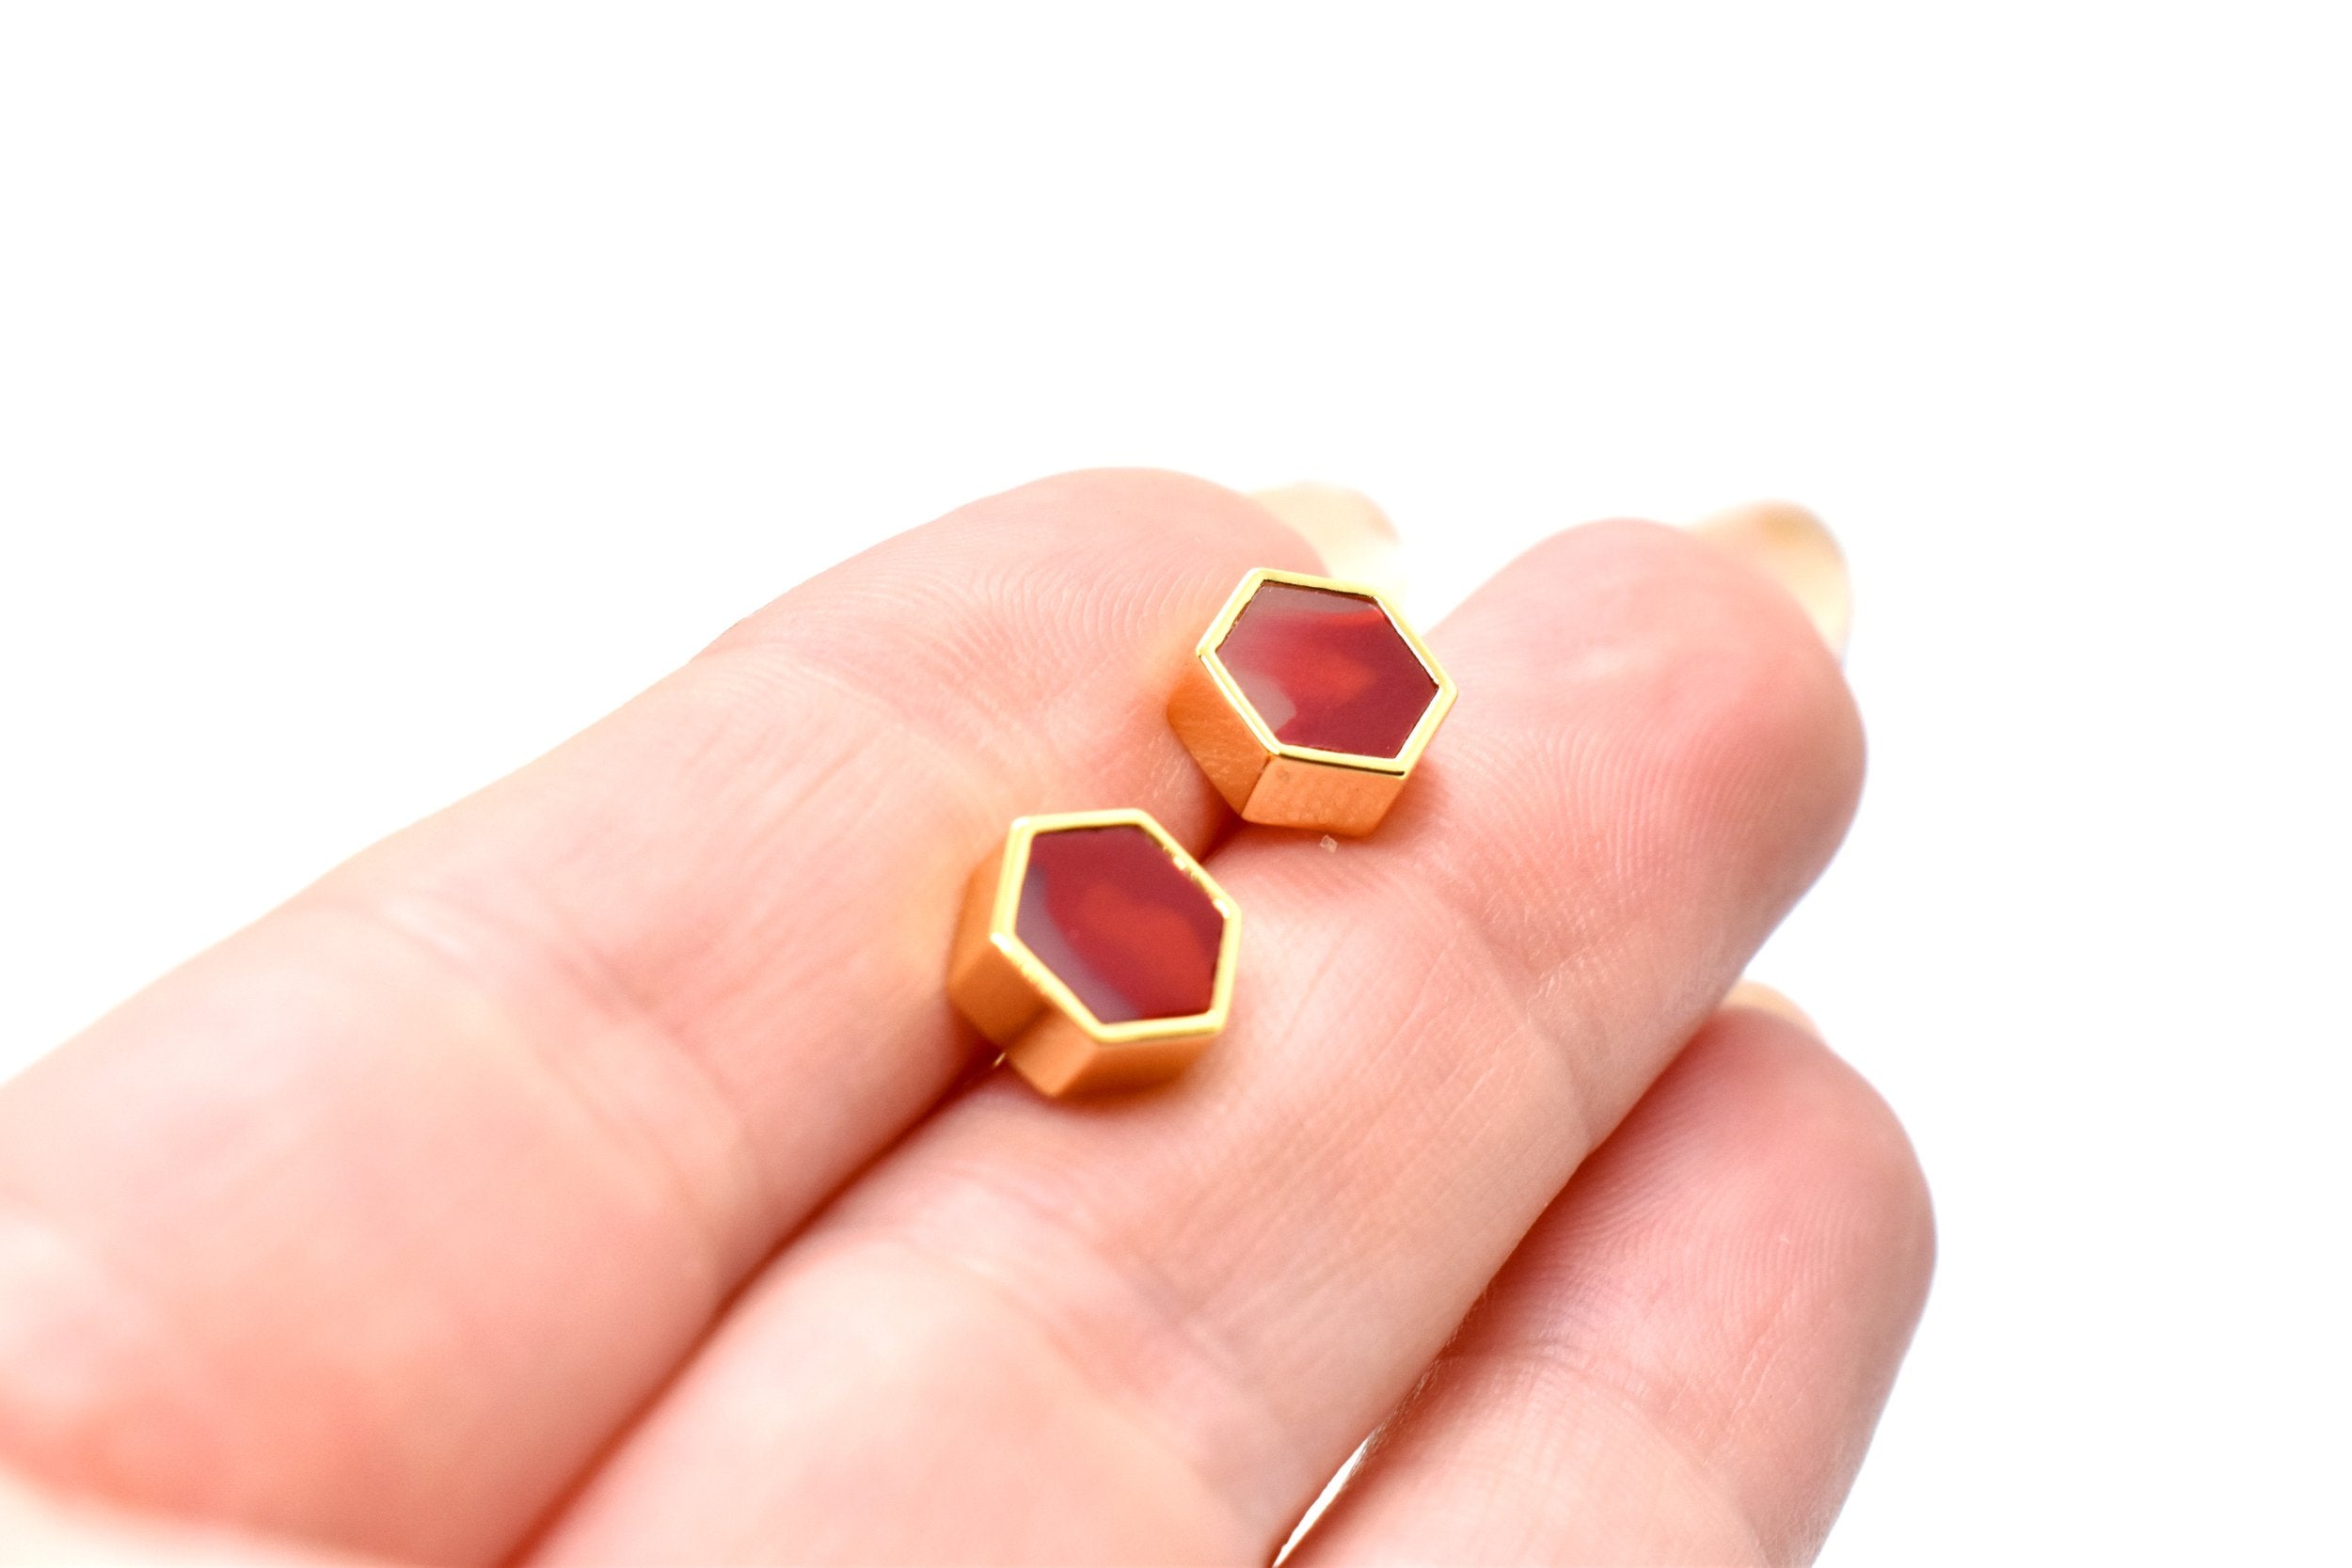 hand holding a pair of studs with 24k gold hexagons and ruby garnet gemstone modern studs against white background